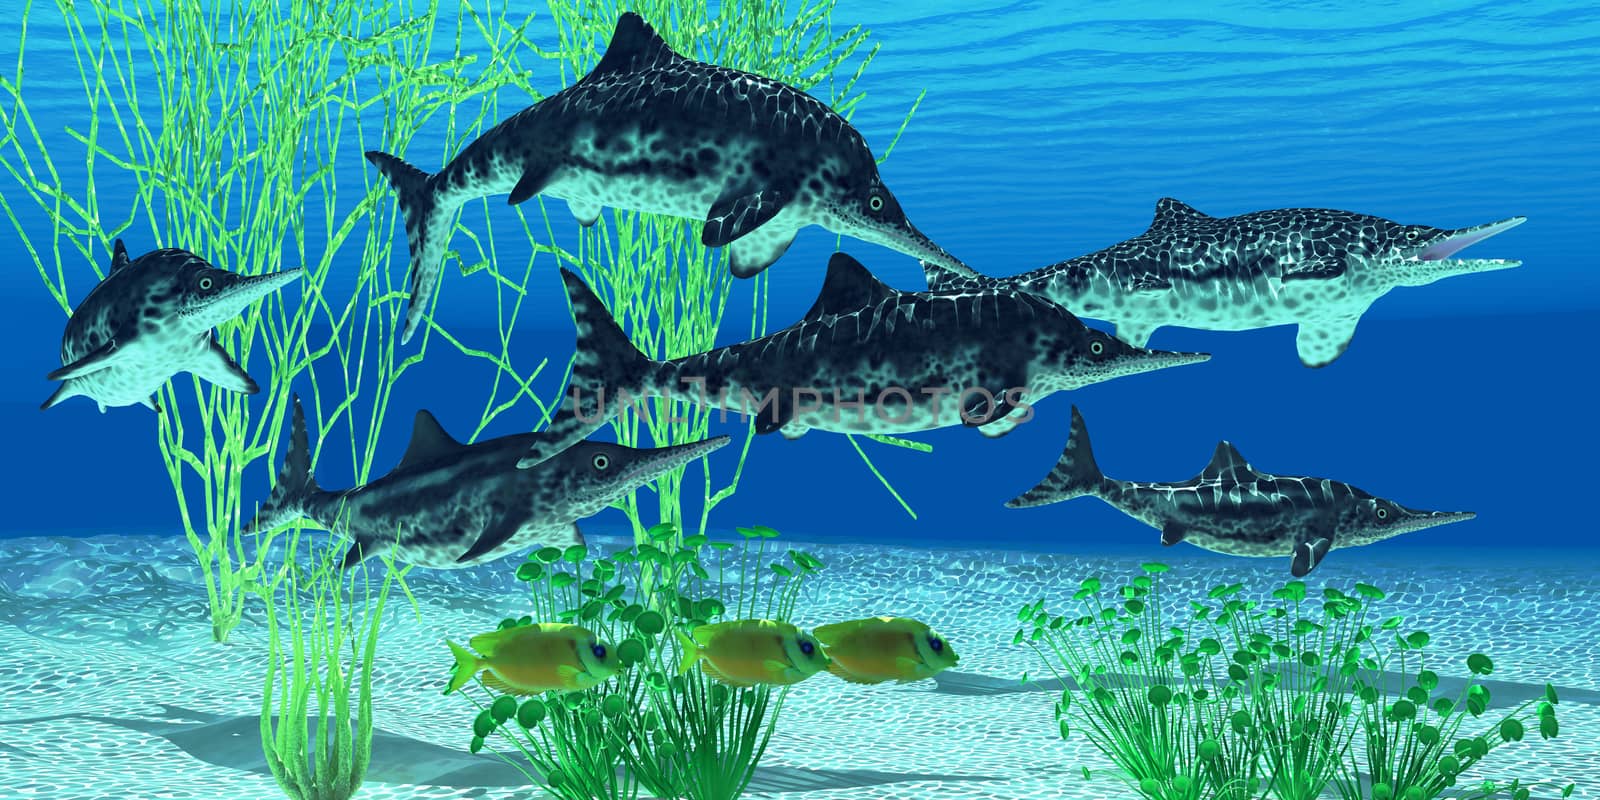 Stenopterygius is an extinct icthyosaur from the Jurassic Age of Europe.